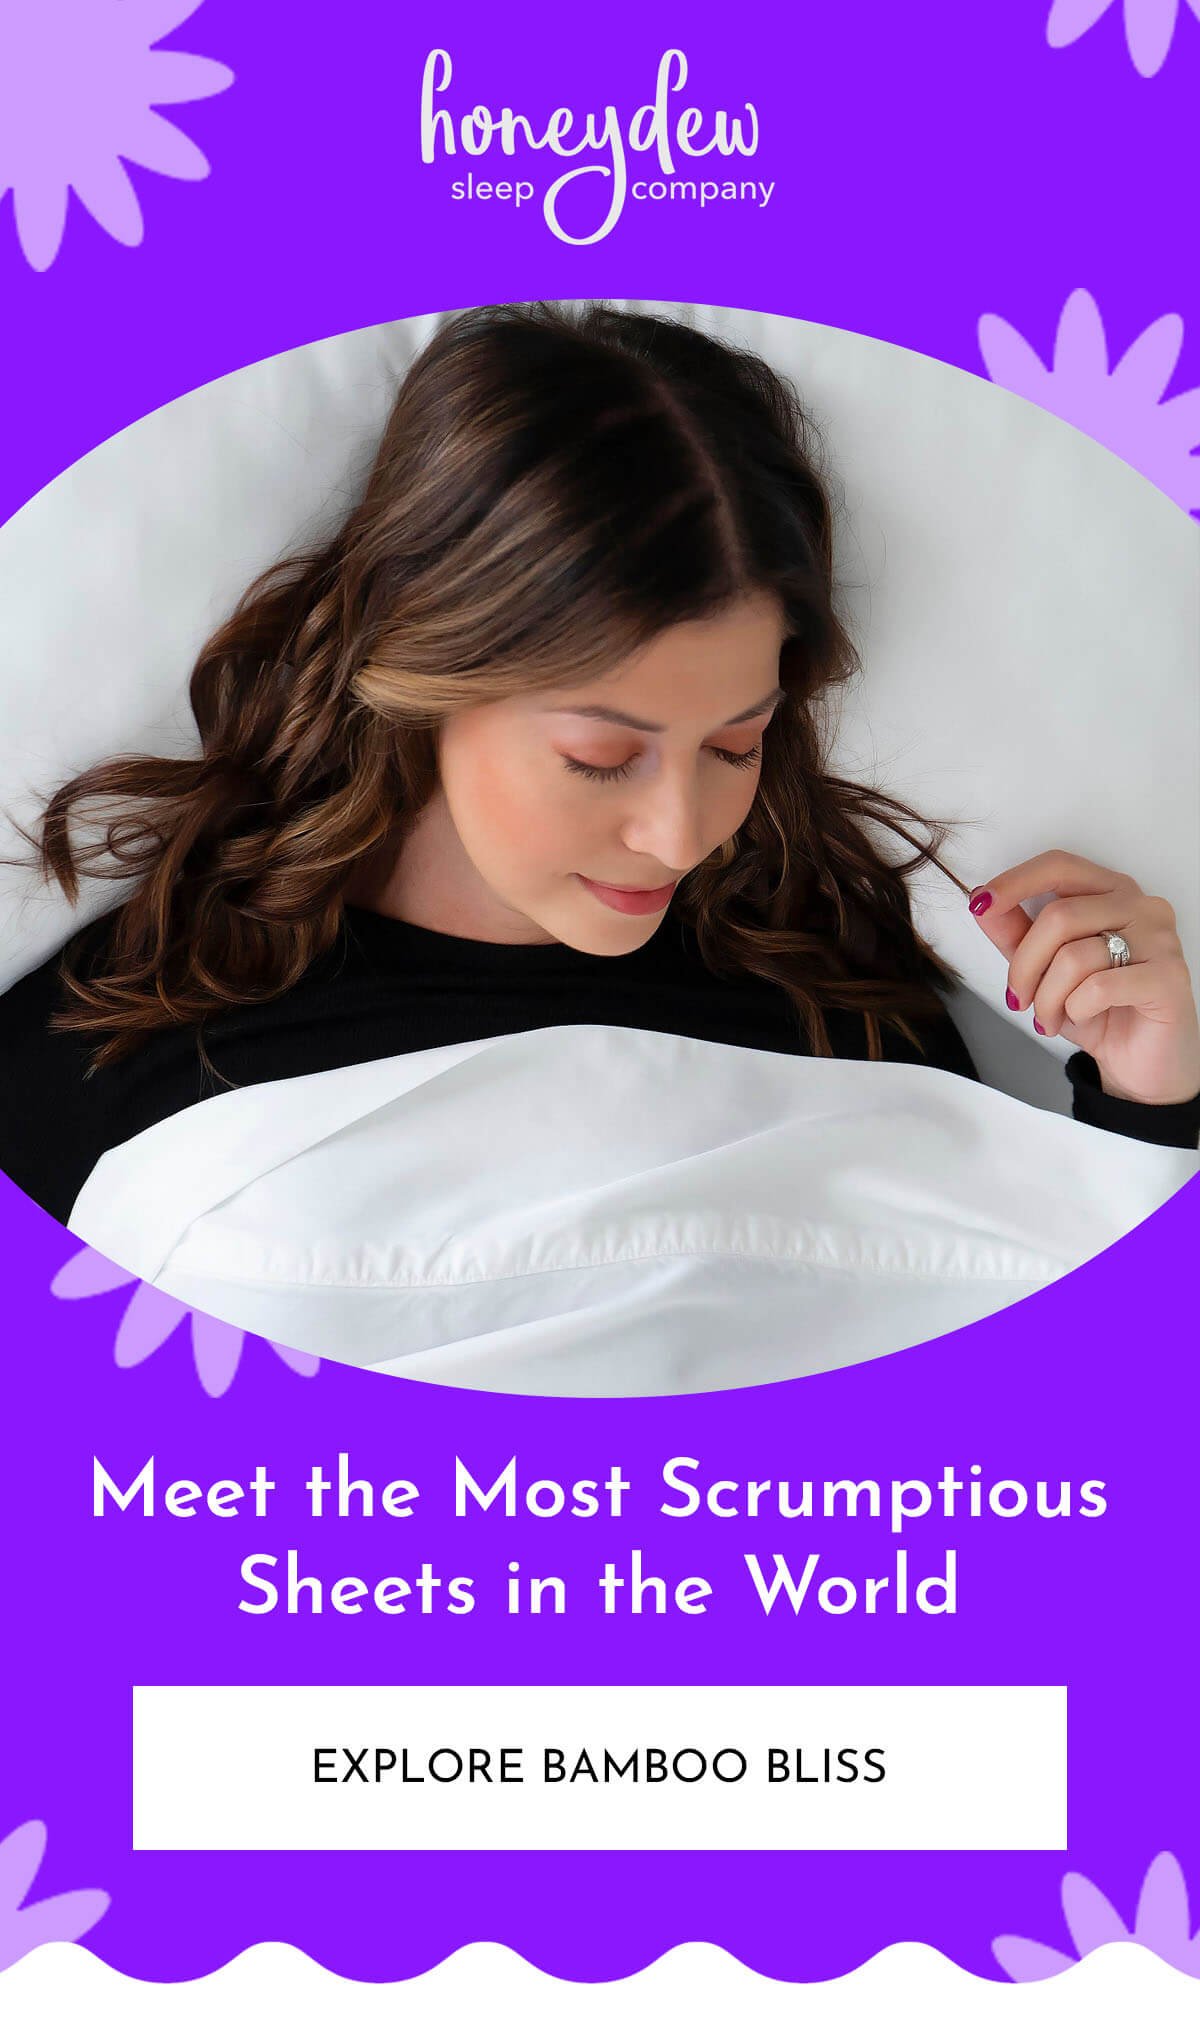 Meet the Most Scrumptious Sheets in the World